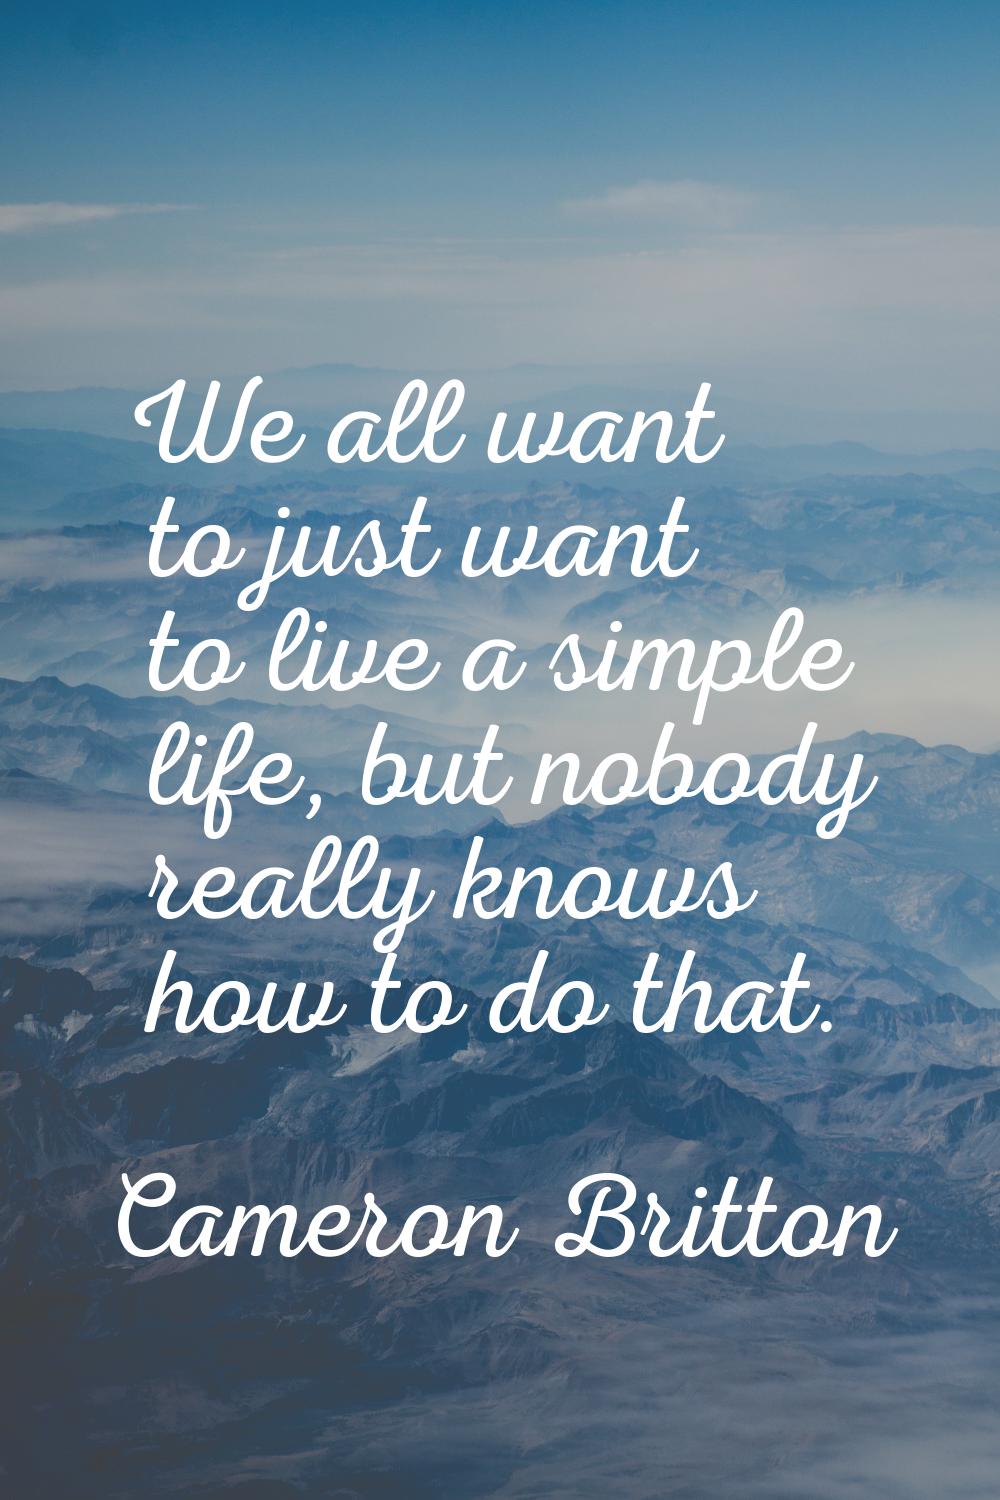 We all want to just want to live a simple life, but nobody really knows how to do that.